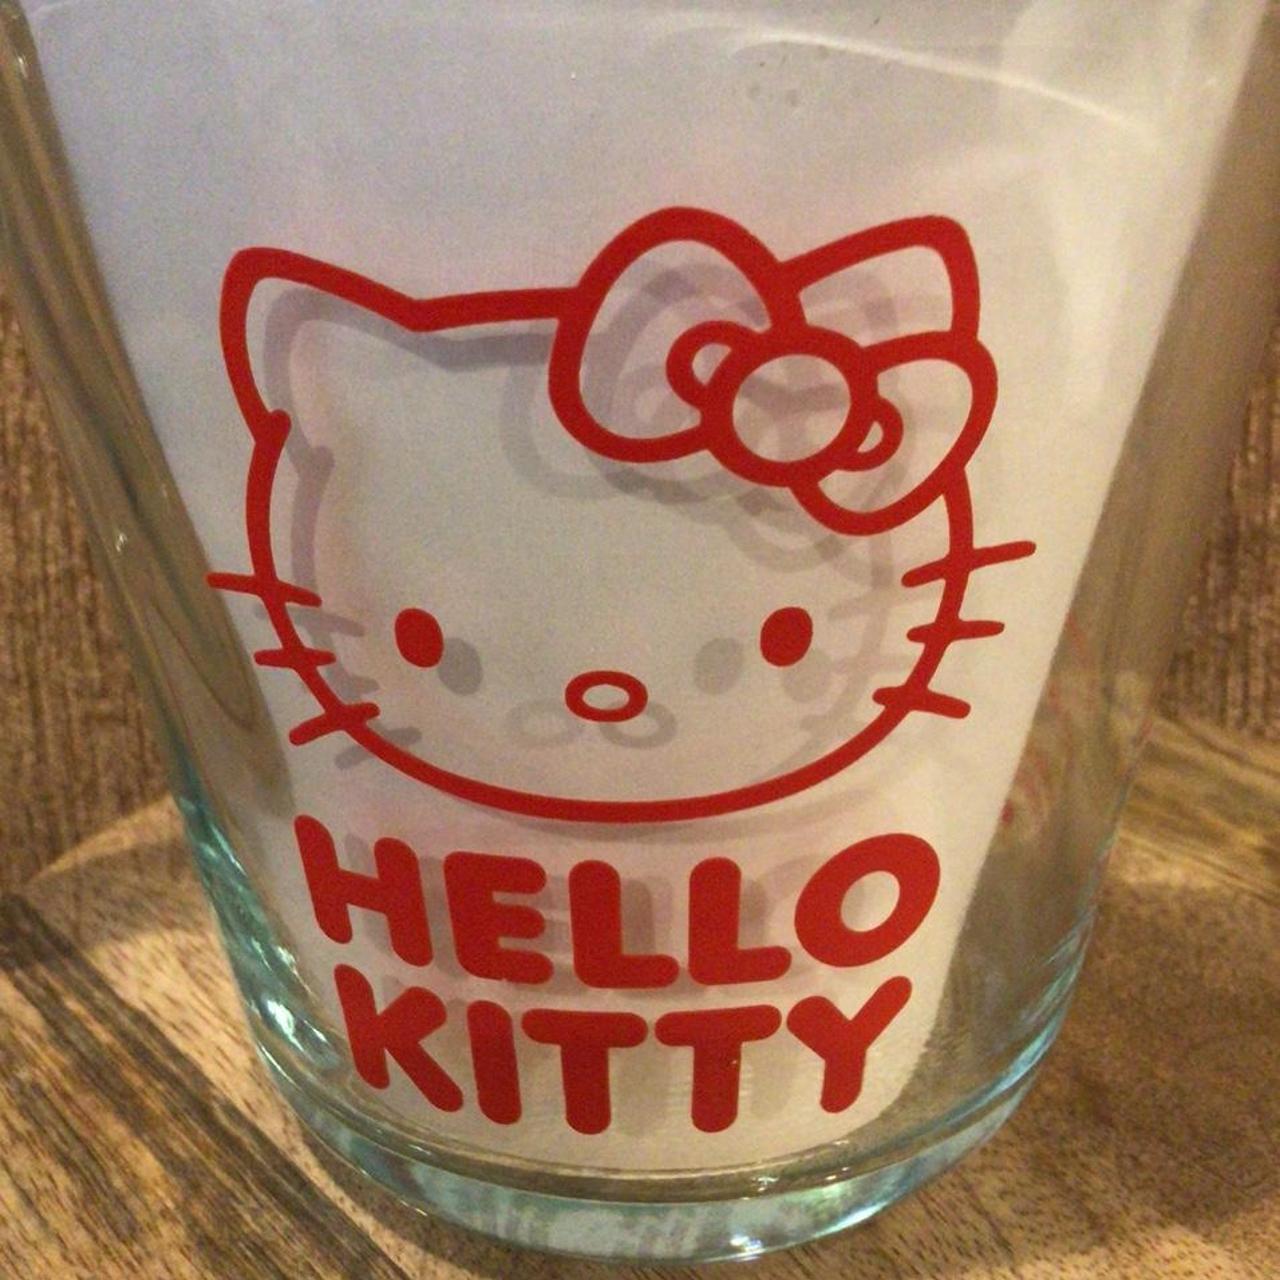 Hello Kitty Pyrex Measuring Cup Sz 2 cup 16 oz Made in USA Microwavable New  Tg